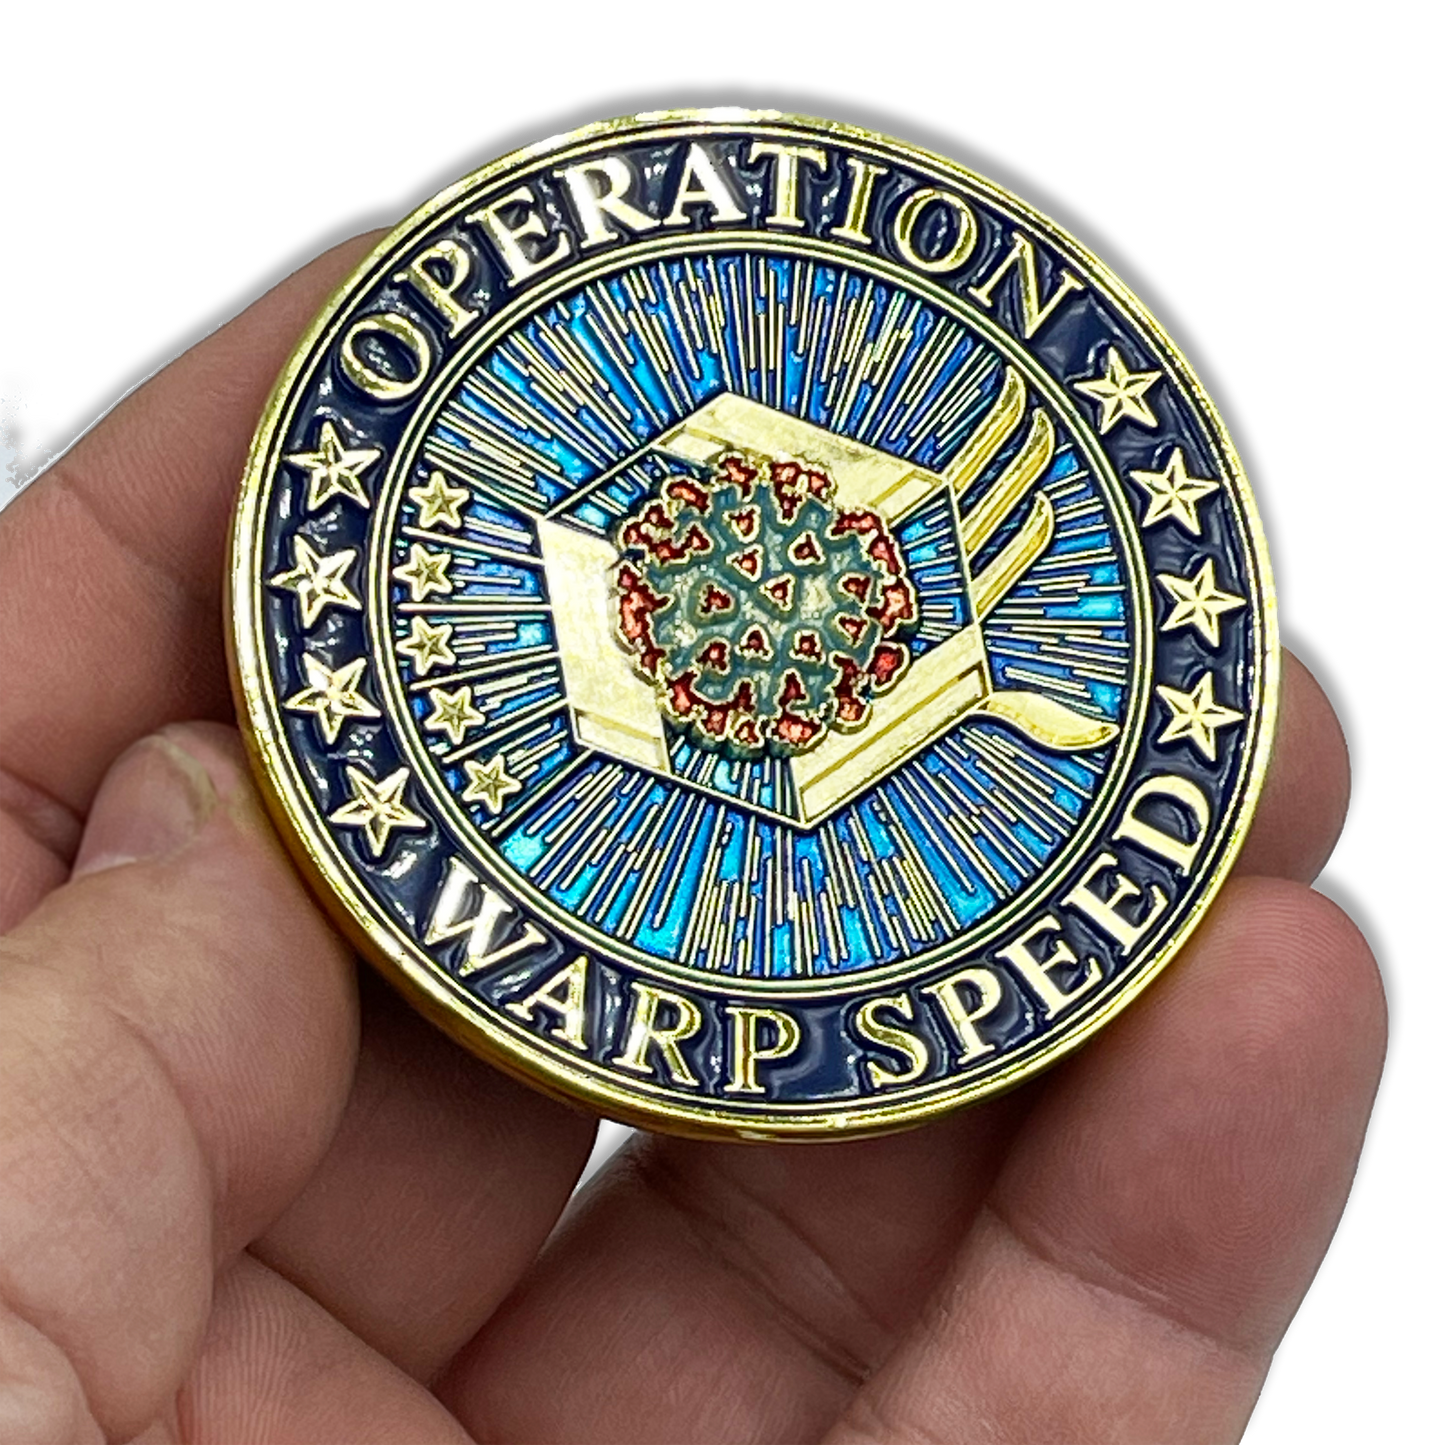 EL4-009 Operation Warp Speed Challenge Coin Covid-19 Vaccine Task Force Department of Defense HHS CDC Pandemic Corona Virus